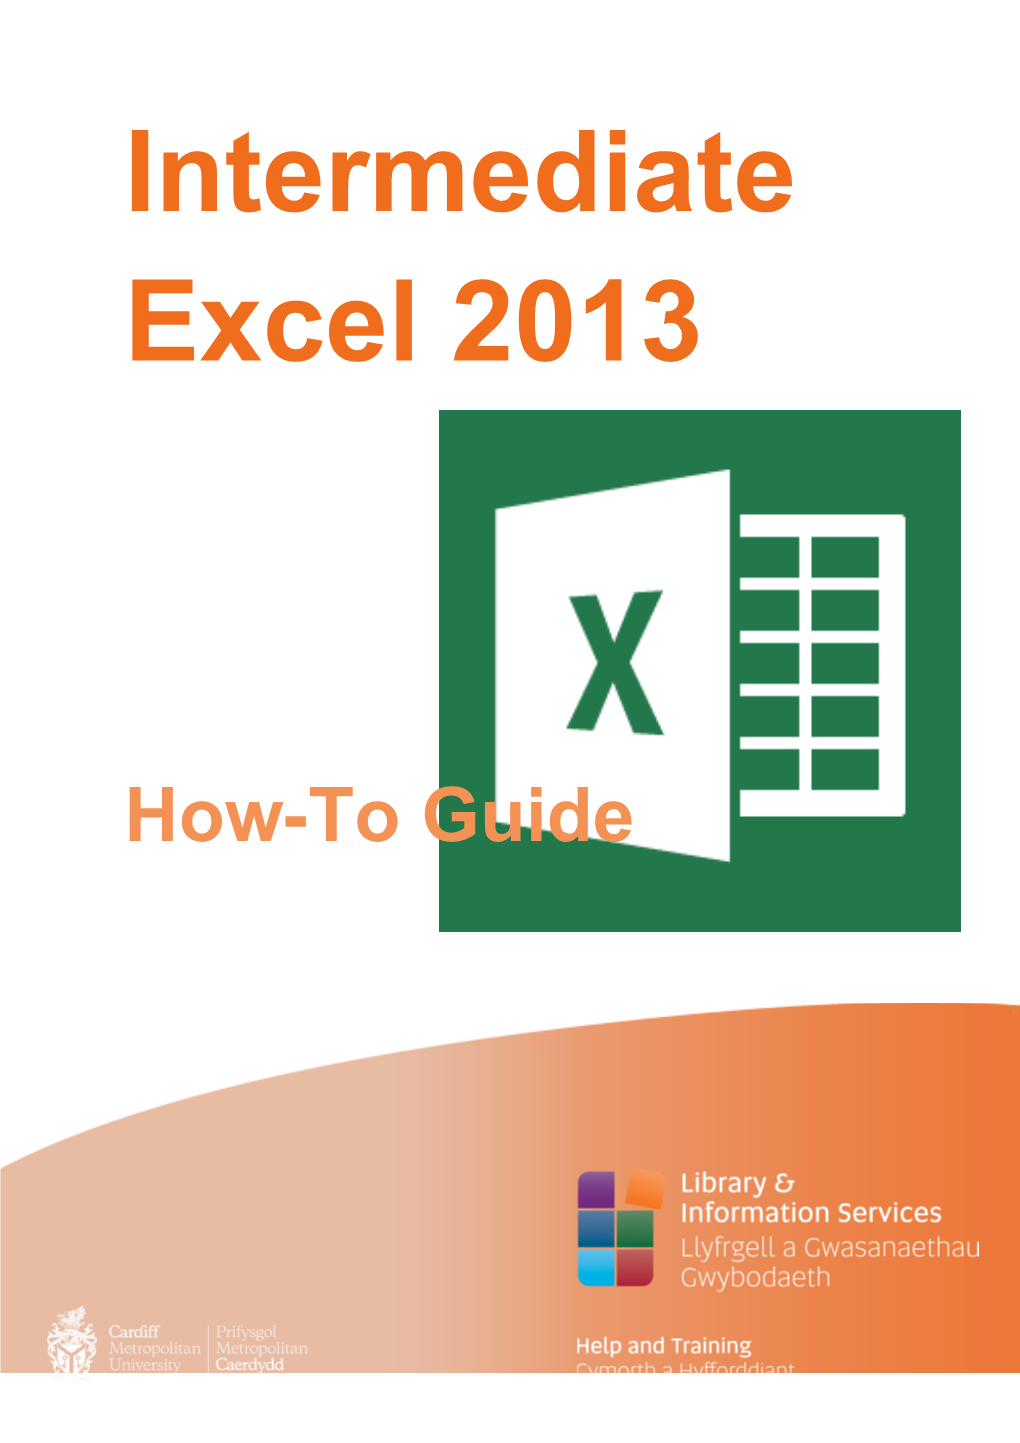 Intermediate Excel 2013 How-To Guide